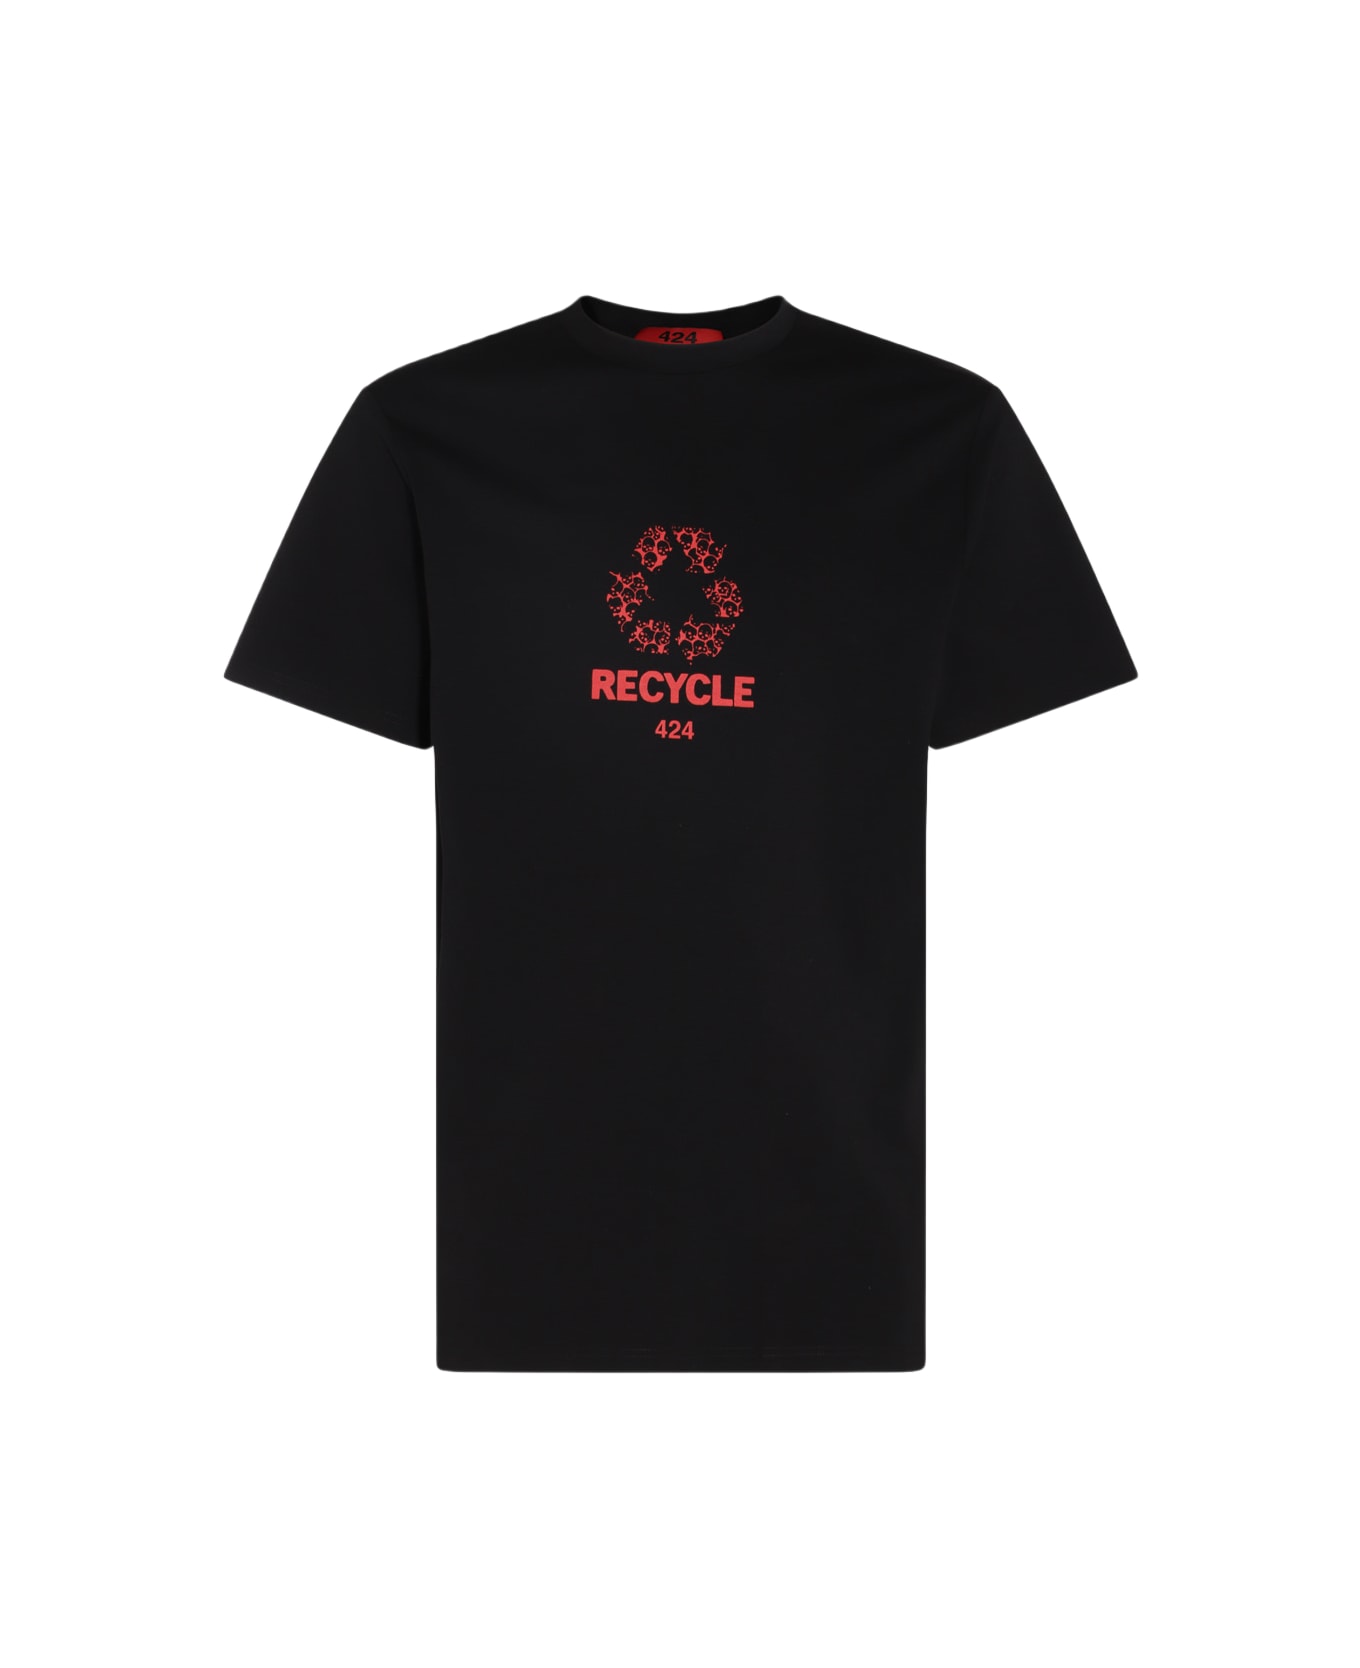 FourTwoFour on Fairfax Black And Red Cotton Blend T-shirt - Black